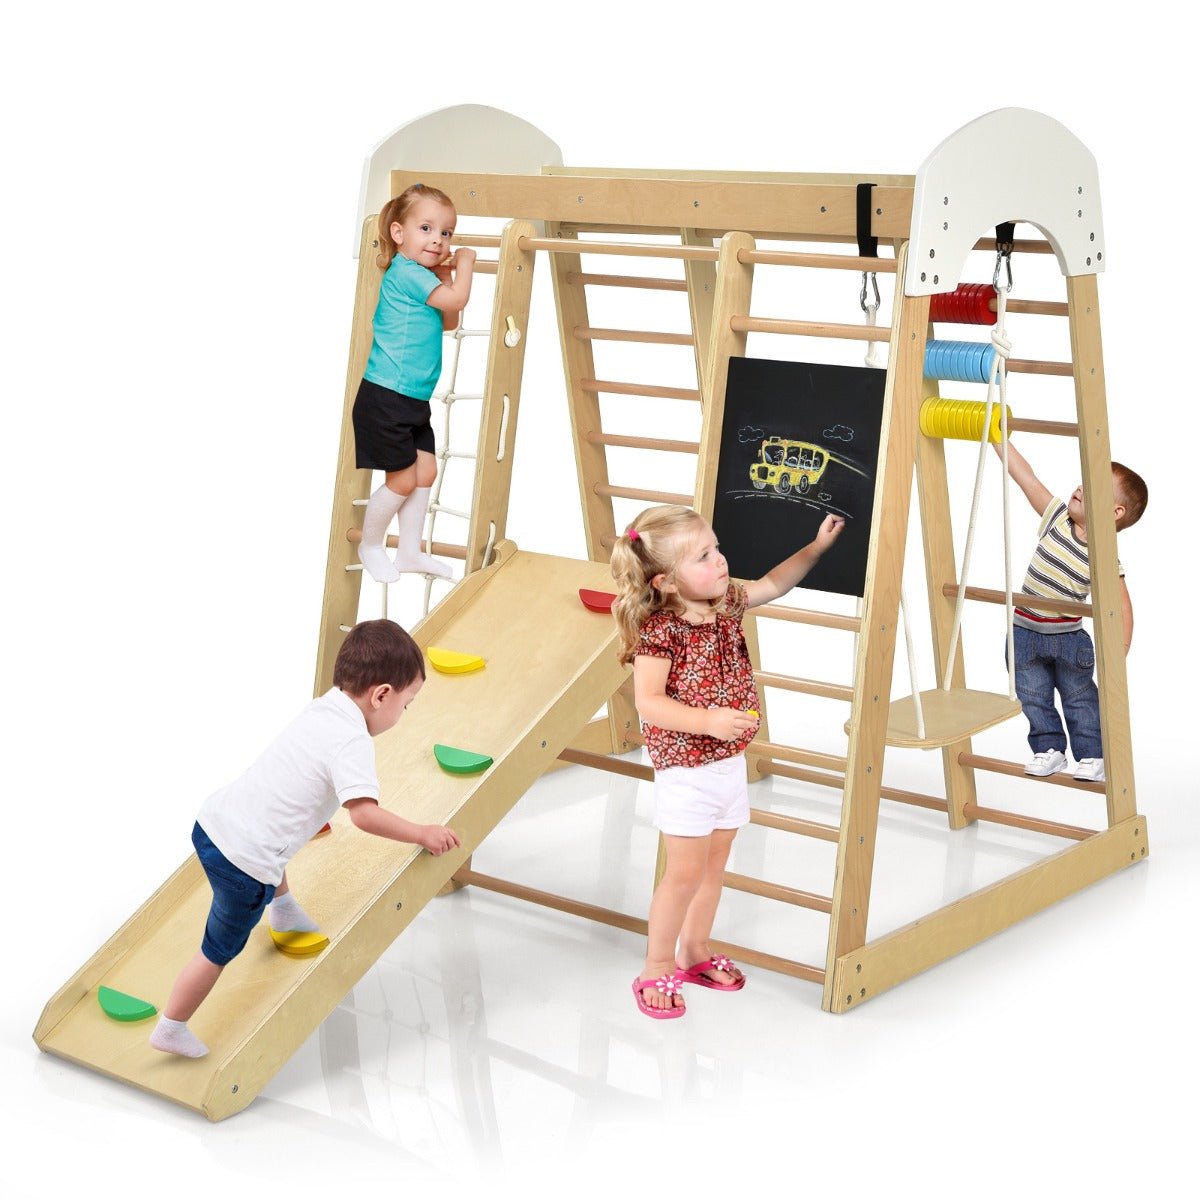 Wholesome Playtime: 8-in-1 Wooden Climbing Playset with Slide and Drawing Board